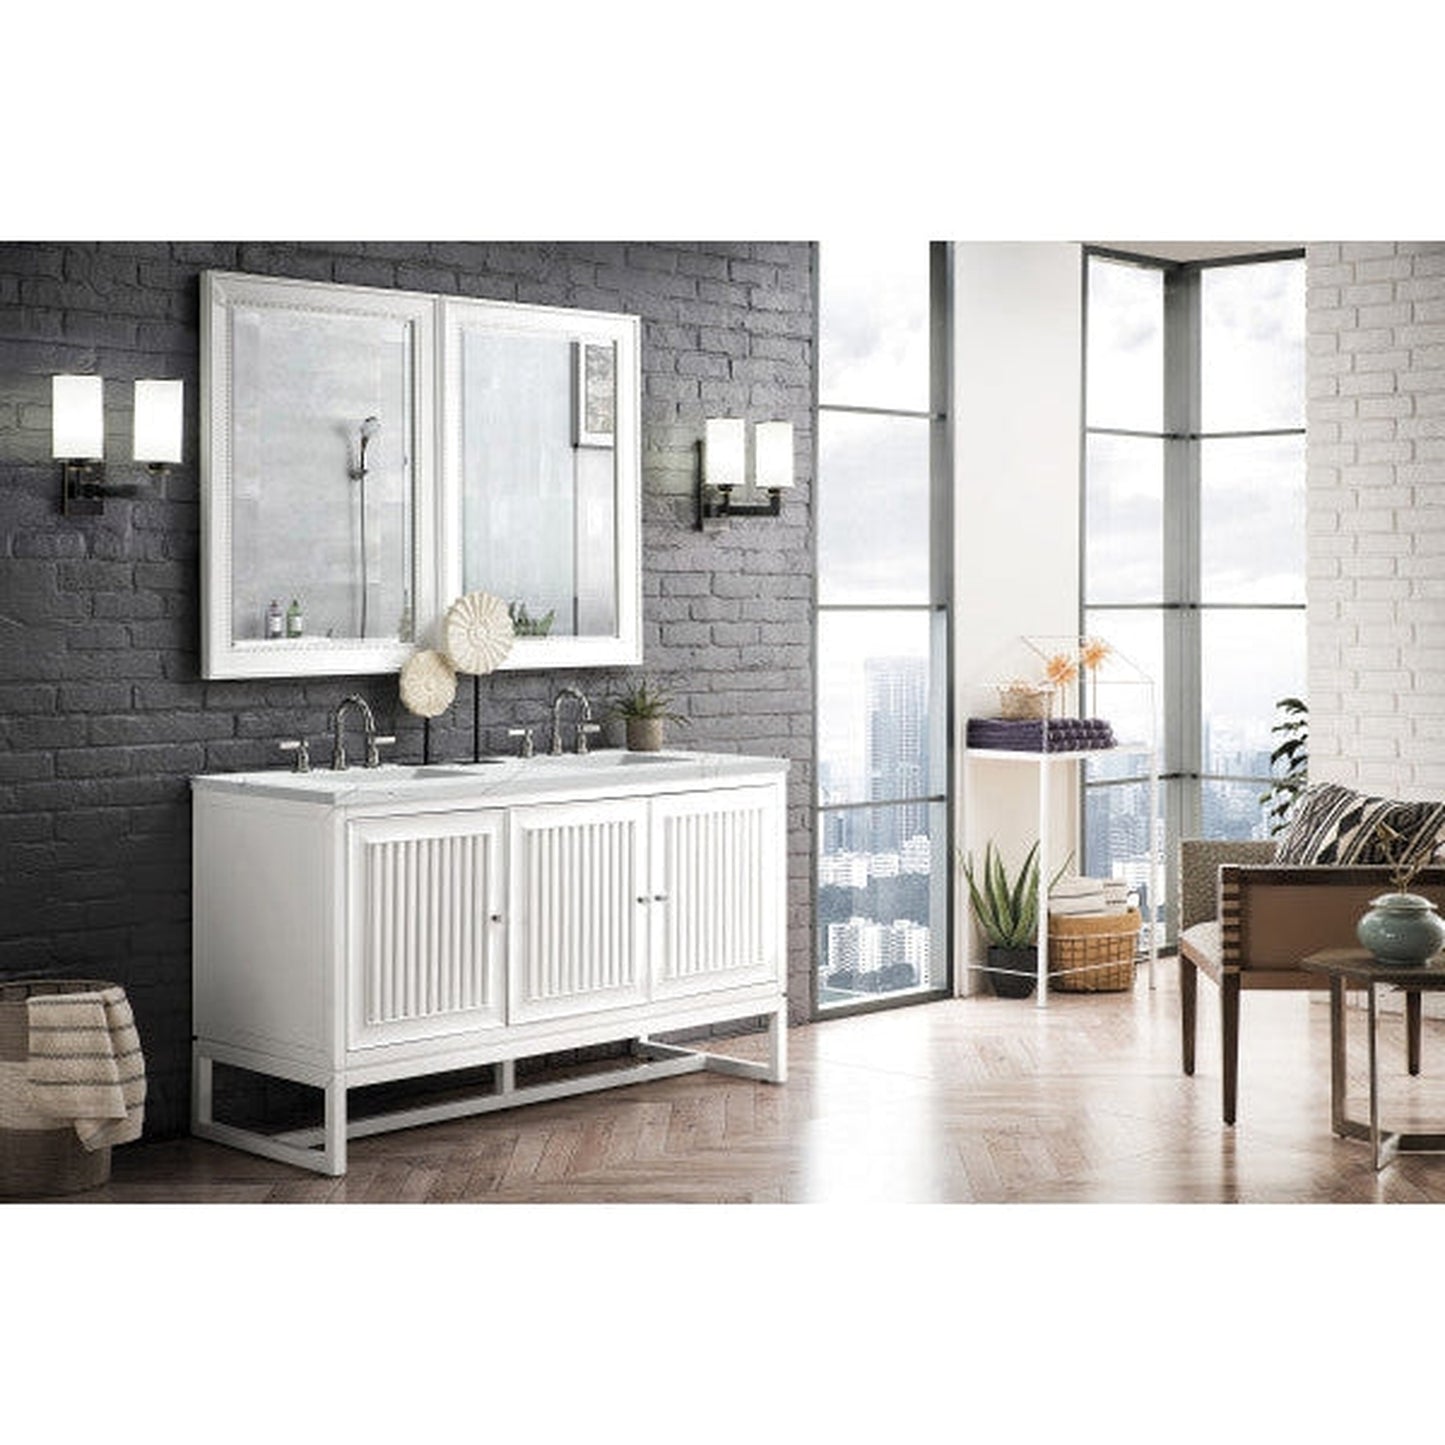 James Martin Athens 60" Double Glossy White Bathroom Vanity With 1" Ethereal Noctis Quartz Top and Rectangular Ceramic Sink